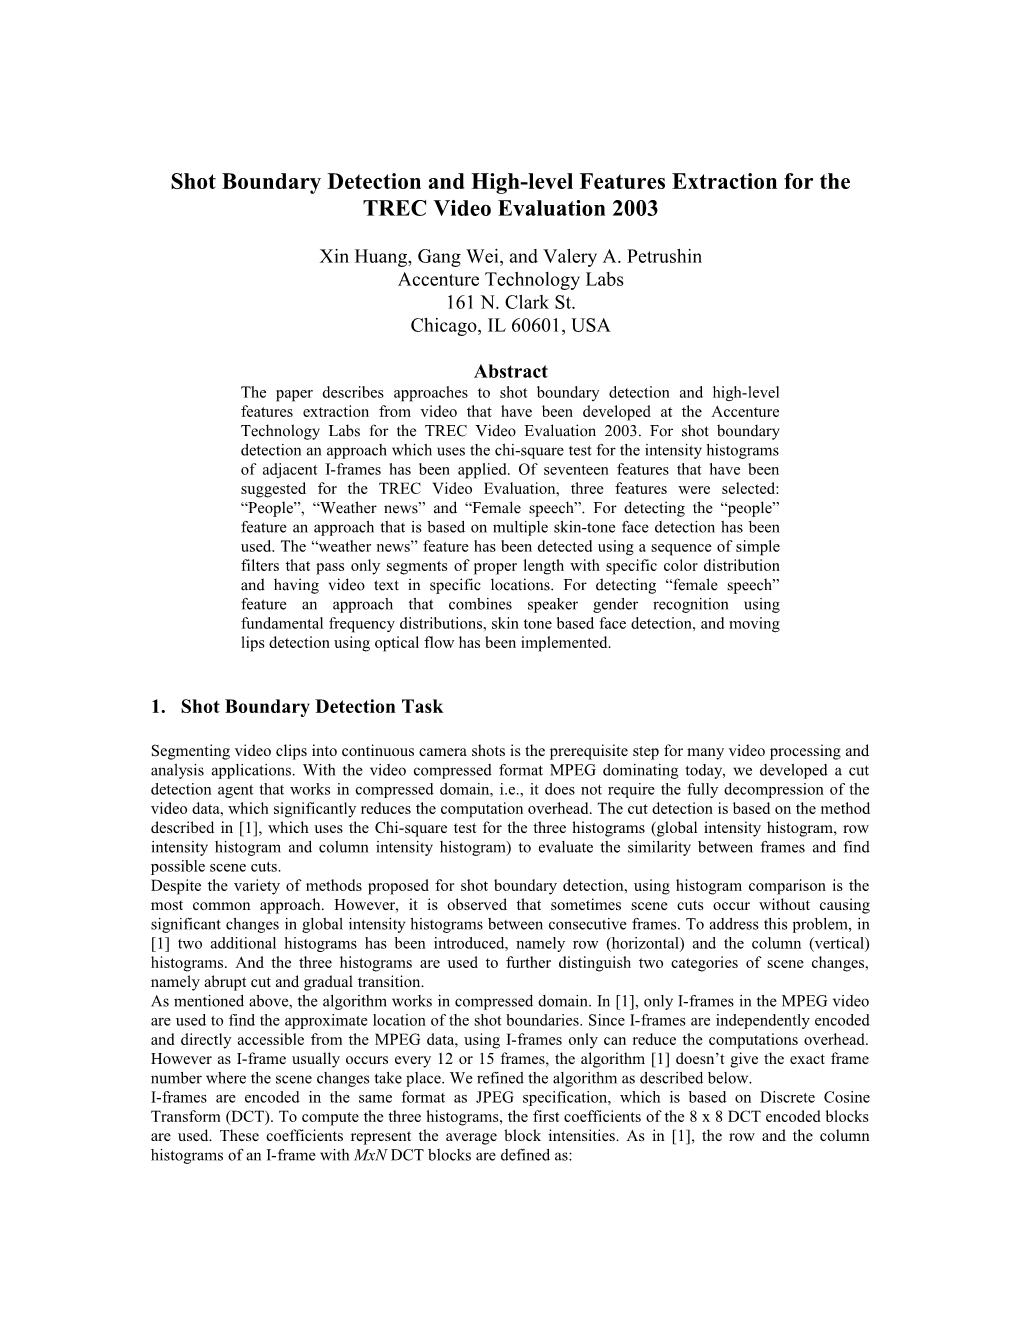 Shot Boundary Detection and High-Level Features Extraction for the TREC Video Evaluation 2003